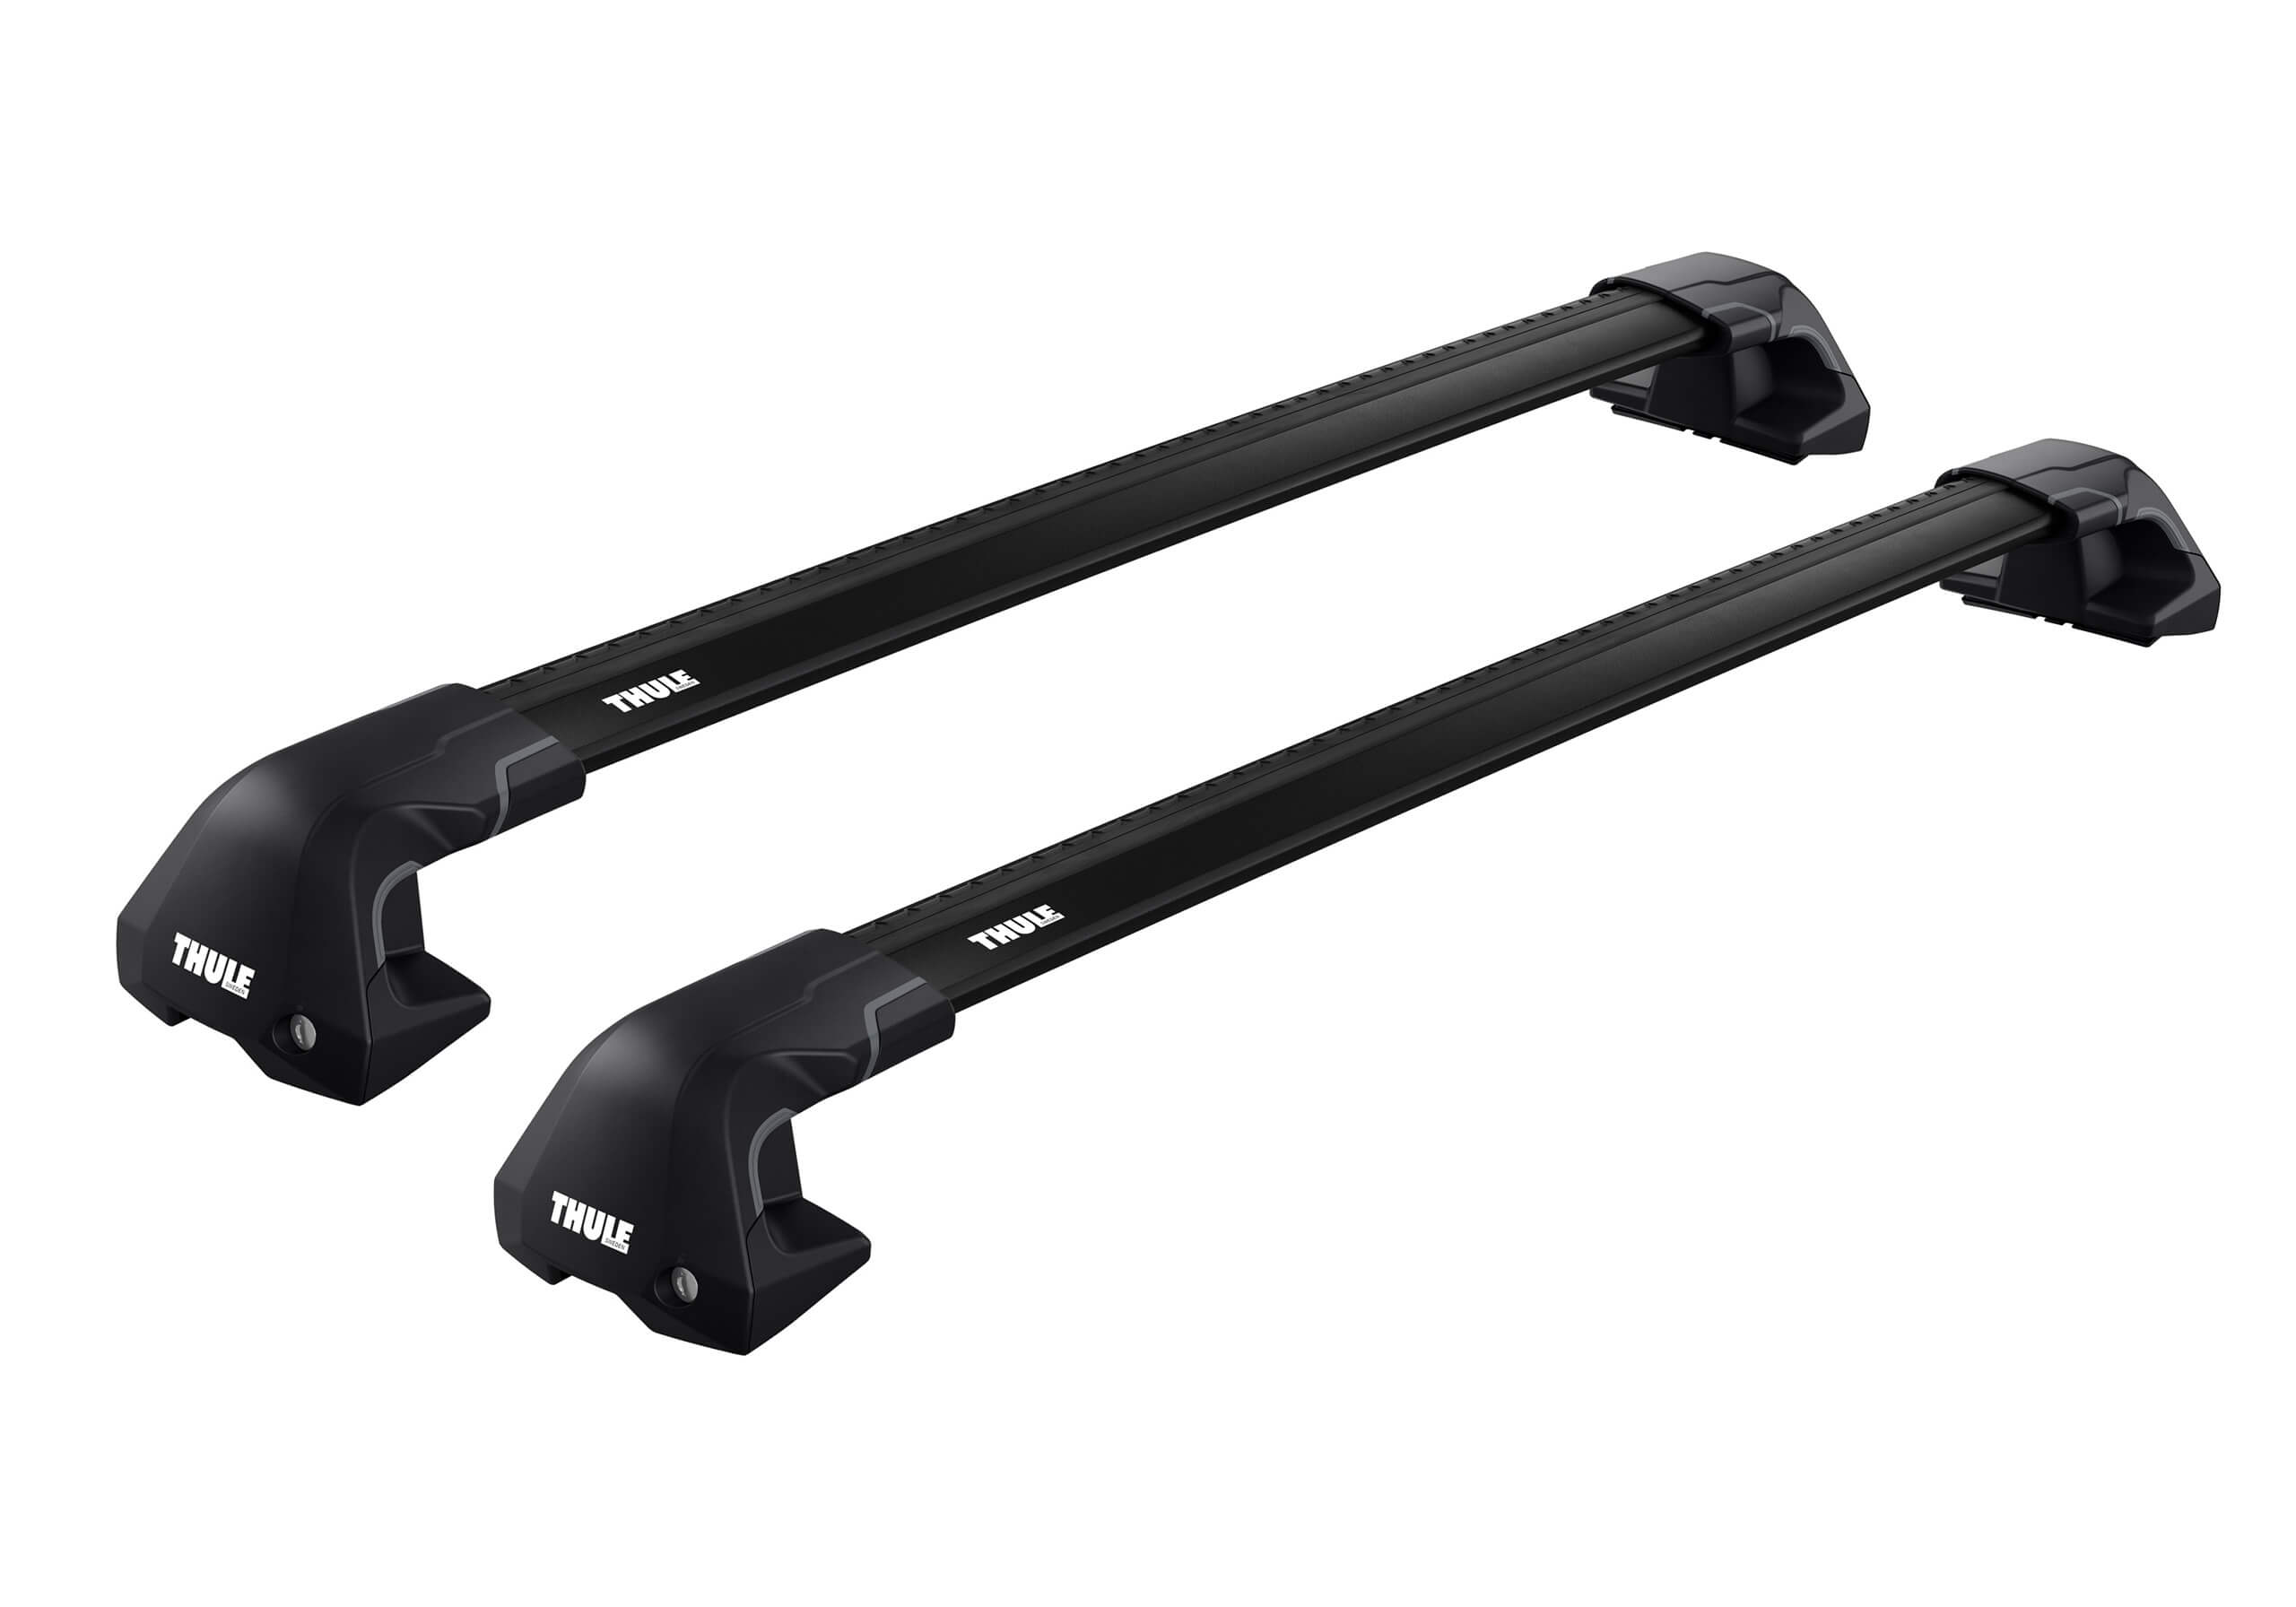 Ford Ranger double cab (2012 to 2016):Thule Edge black WingBars package - 7205, 7215B x 2, 5063